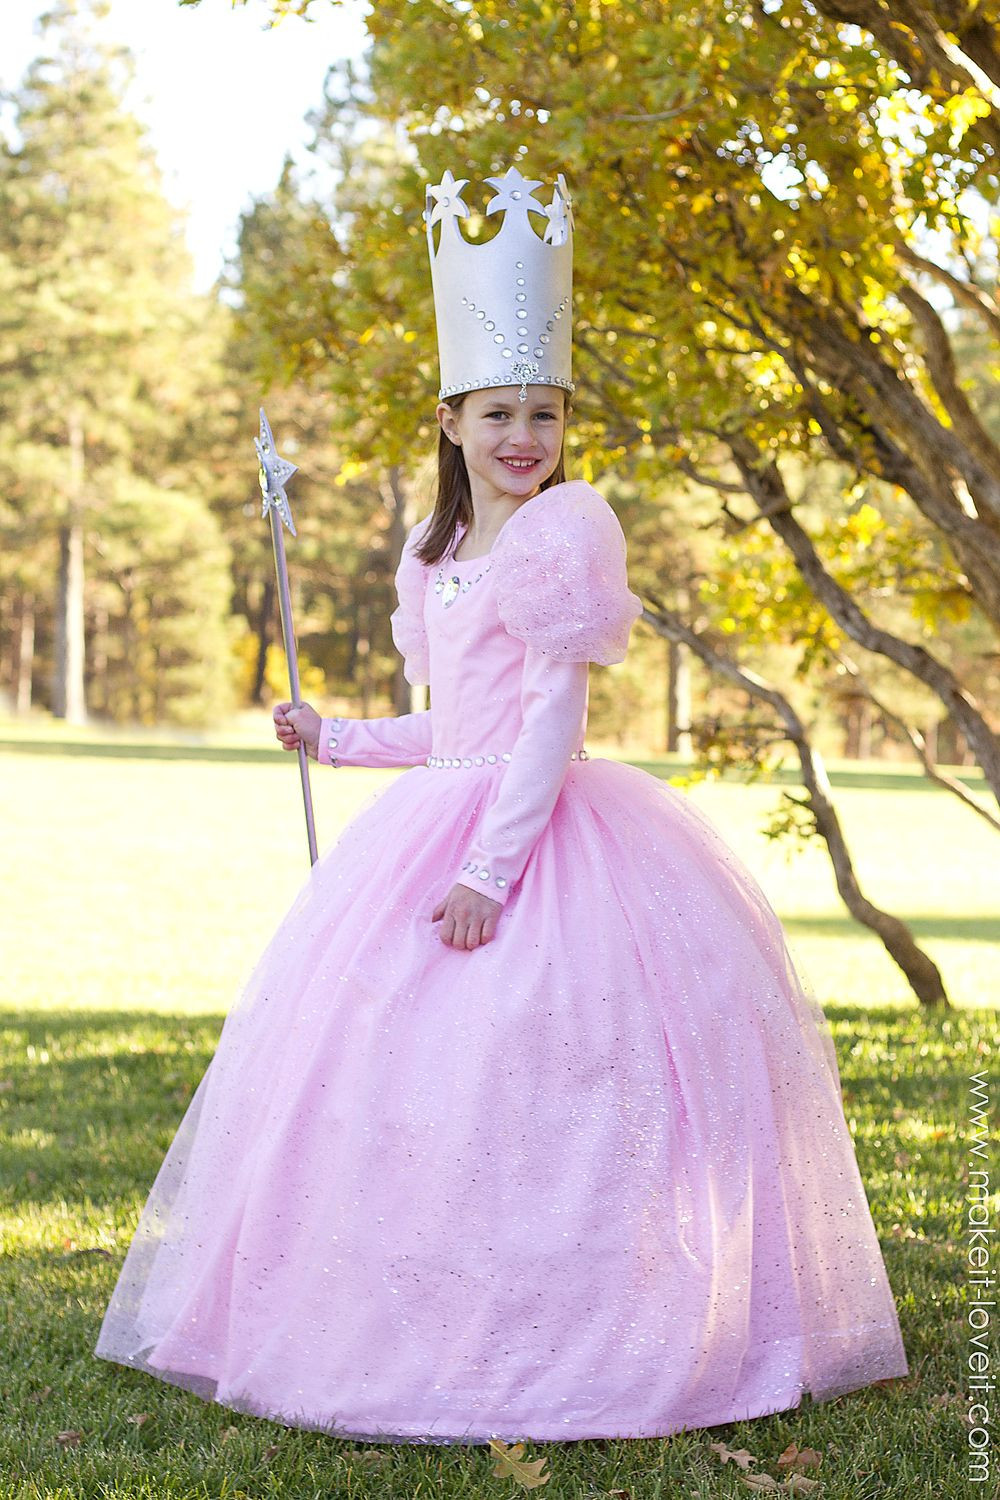 Glinda The Good Witch Costume DIY
 Glinda the Good Witch from "Wizard of Oz"